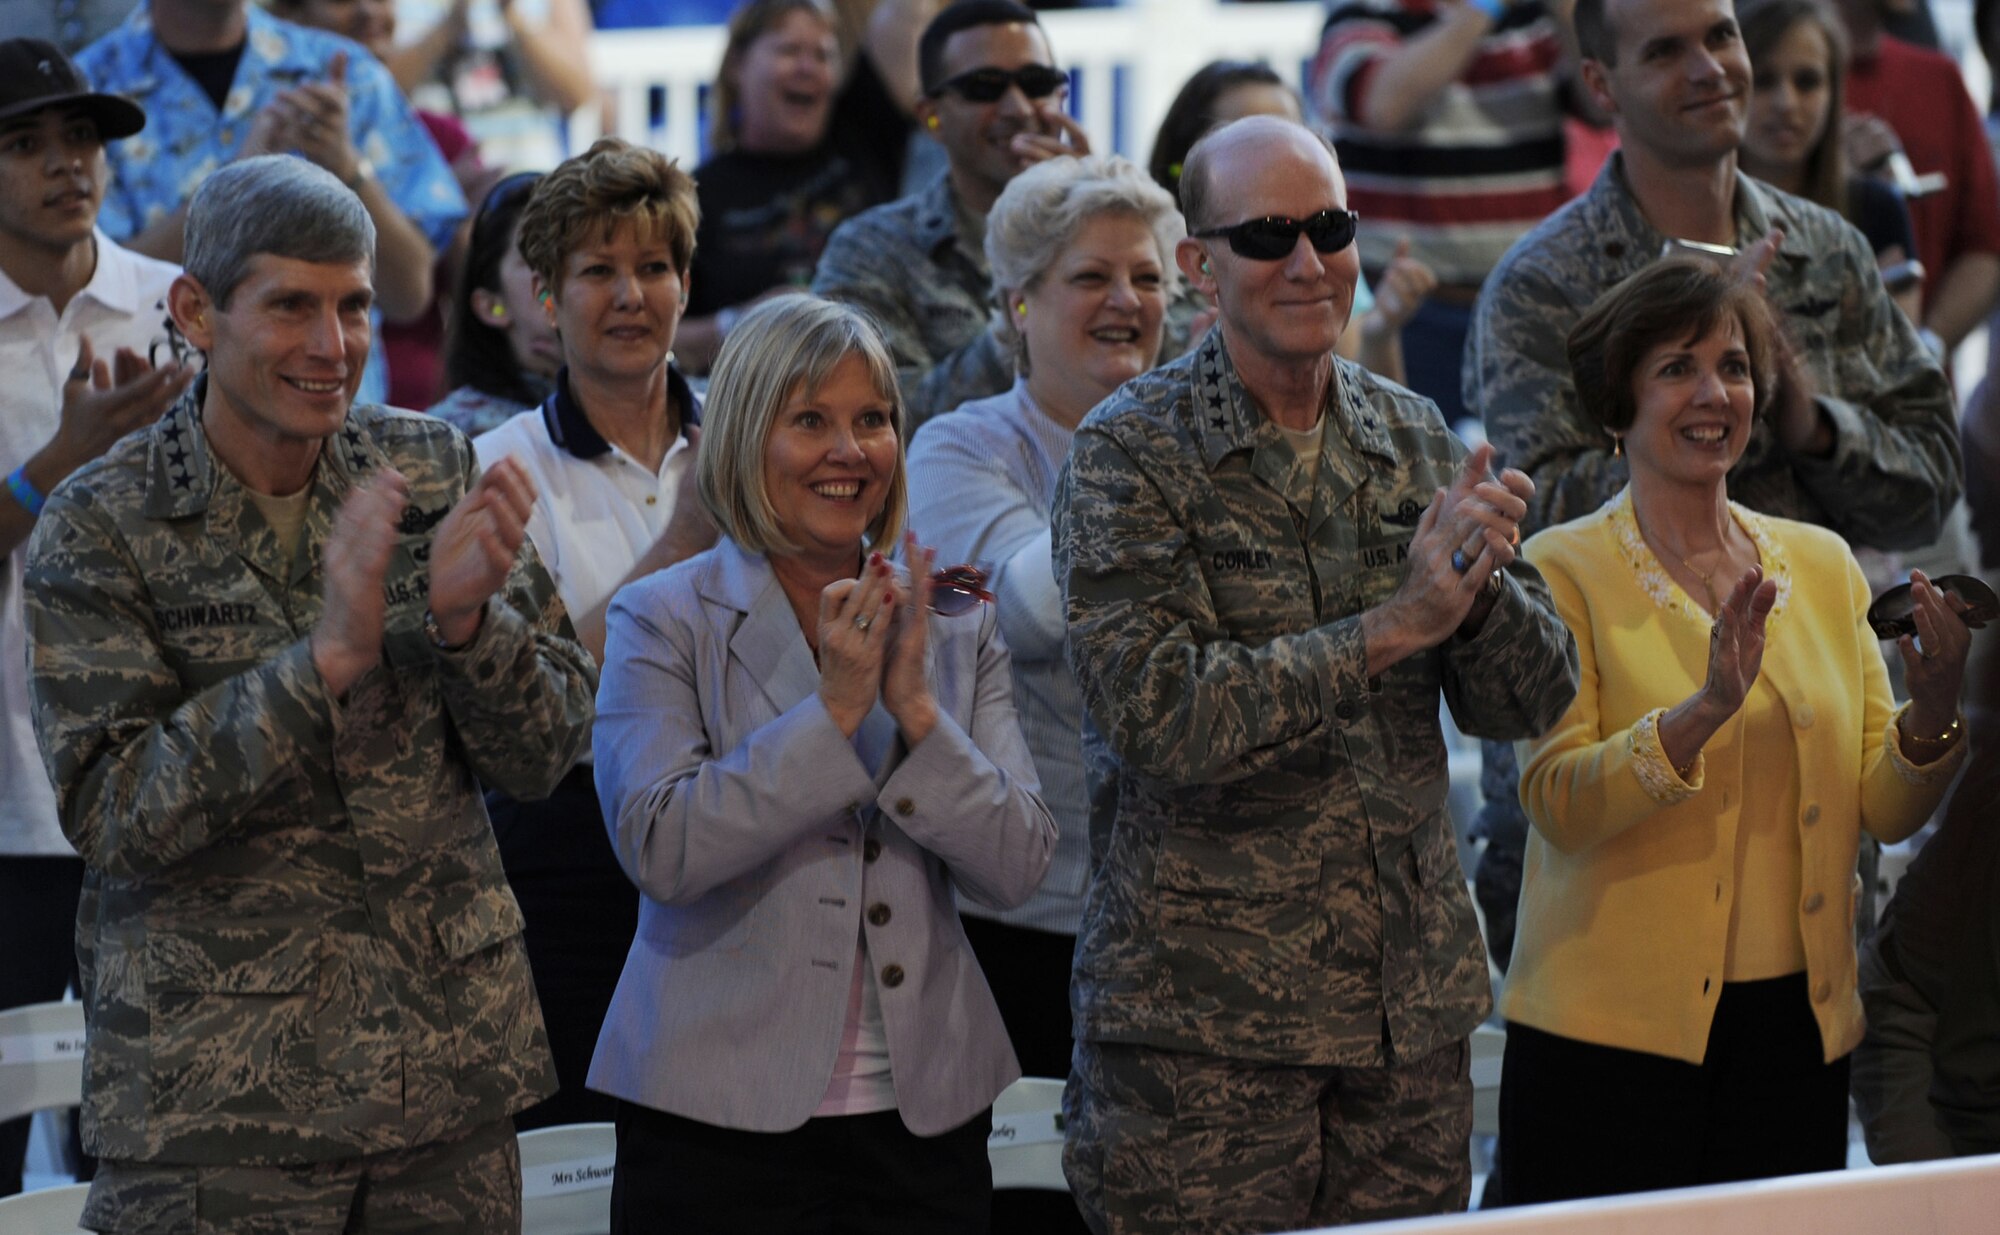 Gen. Norton Schwartz (from left), Air Force chief of staff, his wife Suzie, Gen. John D.W. Corley, Air Combat Command commander, and his wife Alice, enjoy the Kentucky Head Hunters concert during the Airpower over Hampton Roads event April 24. The first evening of the air show at Langley Air Force Base, Va., kicked off with a live concert from the country band, followed by a night air show and fireworks. (U.S. Air Force photo/Senior Airman Ashley Hawkins)